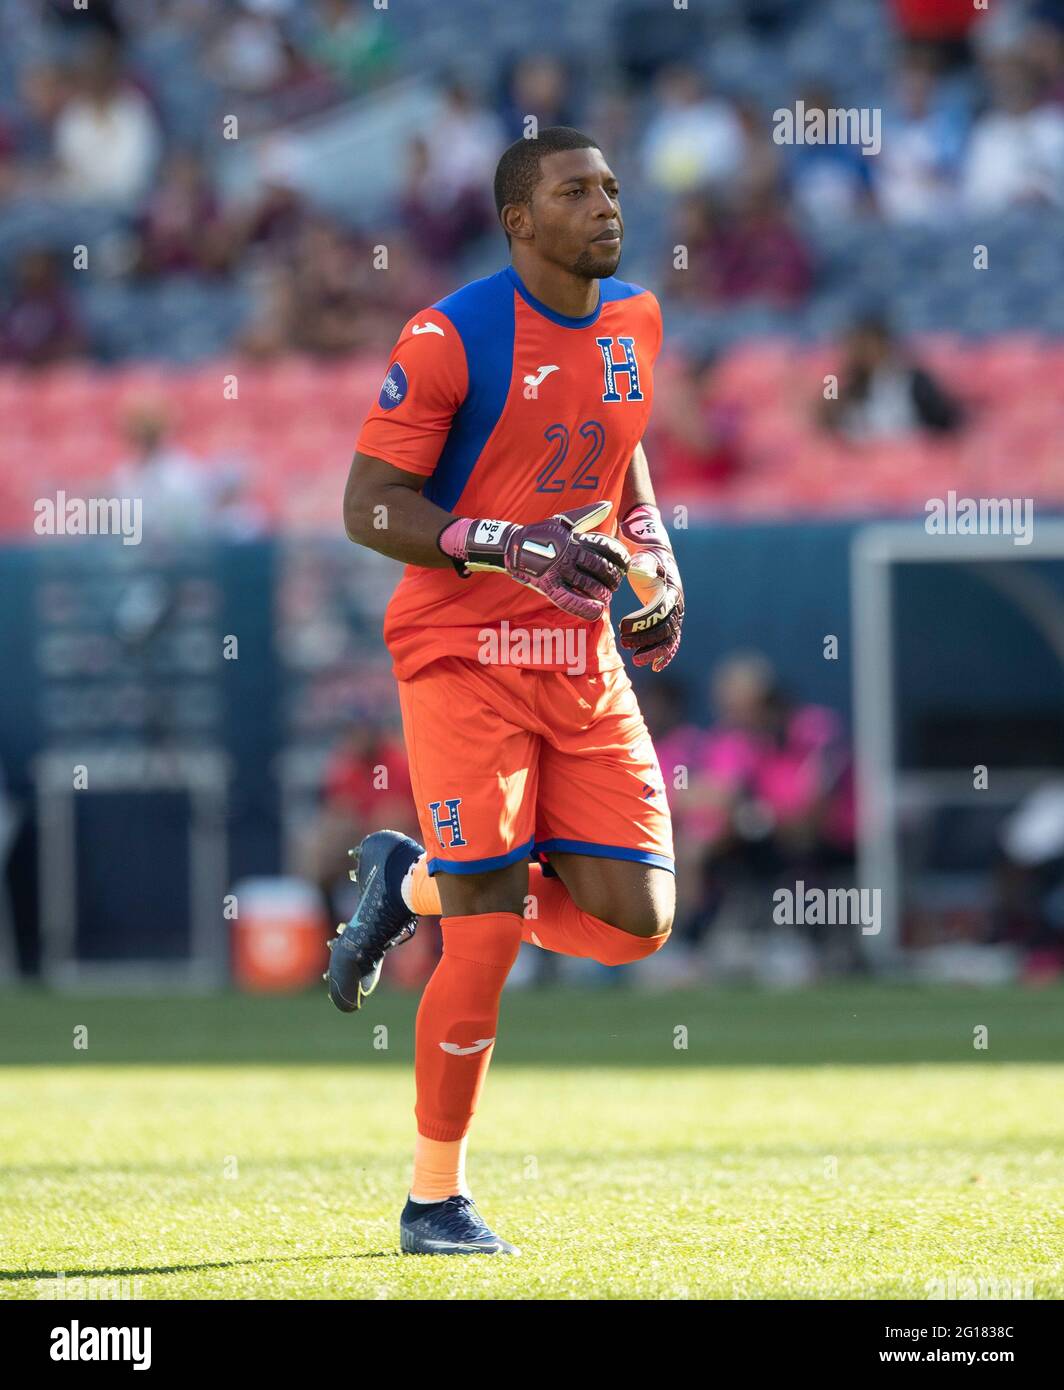 Denver, Colorado, USA. 3rd June, 2021. Honduras Goalie LUIS LOPEZ runs to his goal at the start of the match between team USA Wed. Night at Empower Field at Mile High. Credit: Hector Acevedo/ZUMA Wire/Alamy Live News Stock Photo